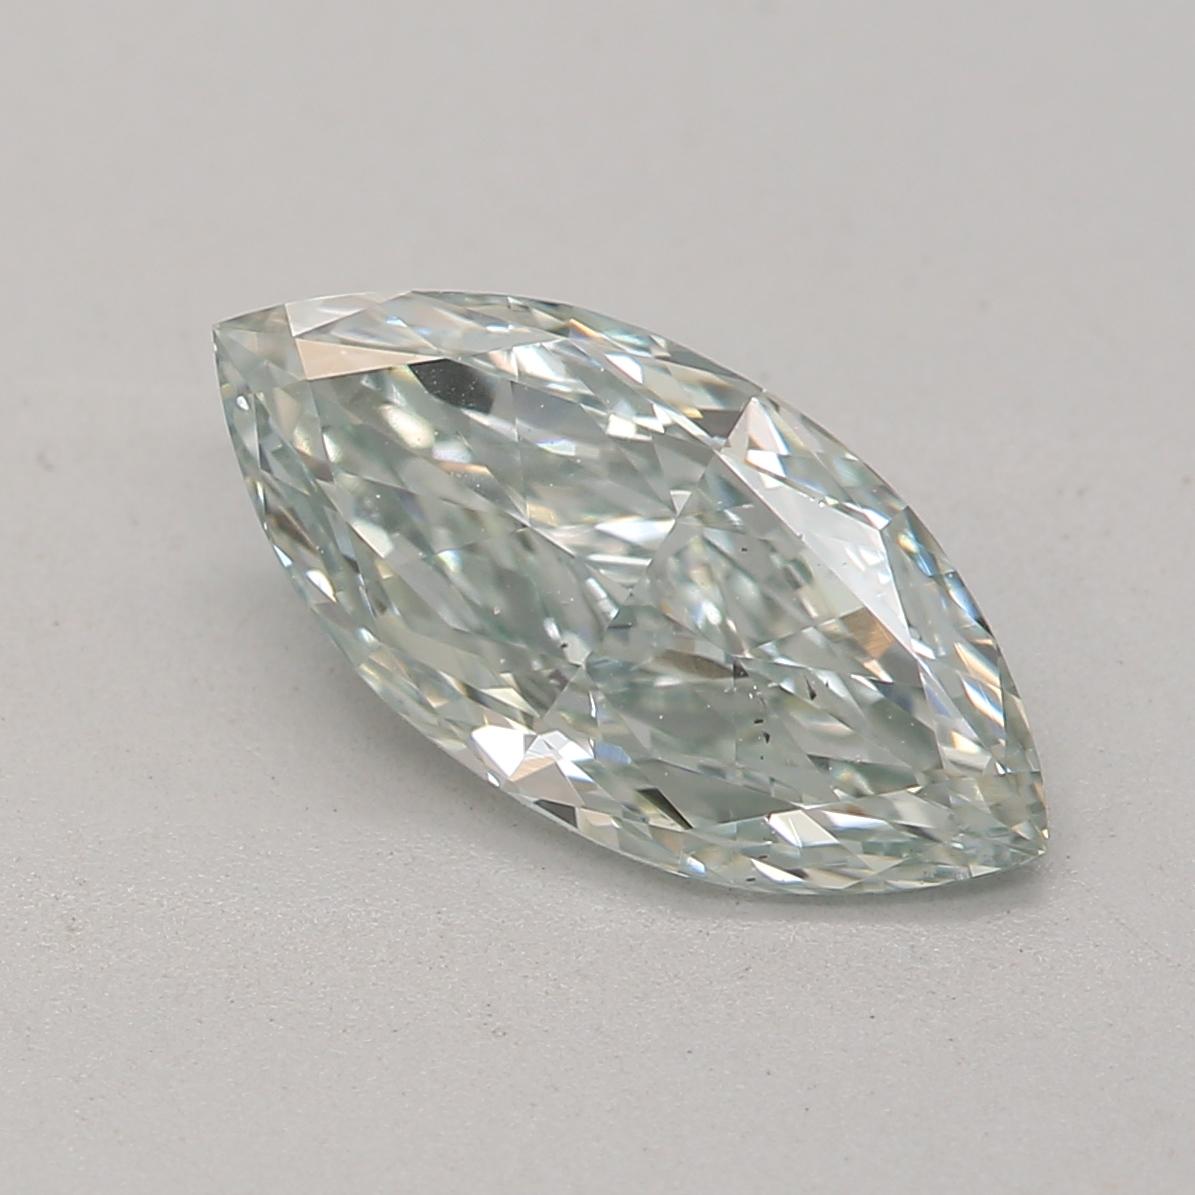 *100% NATURAL FANCY COLOUR DIAMOND*

✪ Diamond Details ✪

➛ Shape: Marquise
➛ Colour Grade: Fancy Grayish Green
➛ Carat: 0.84
➛ Clarity: Vs2
➛ GIA  Certified 

^FEATURES OF THE DIAMOND^

This fancy greyish-green diamond is a rare diamond